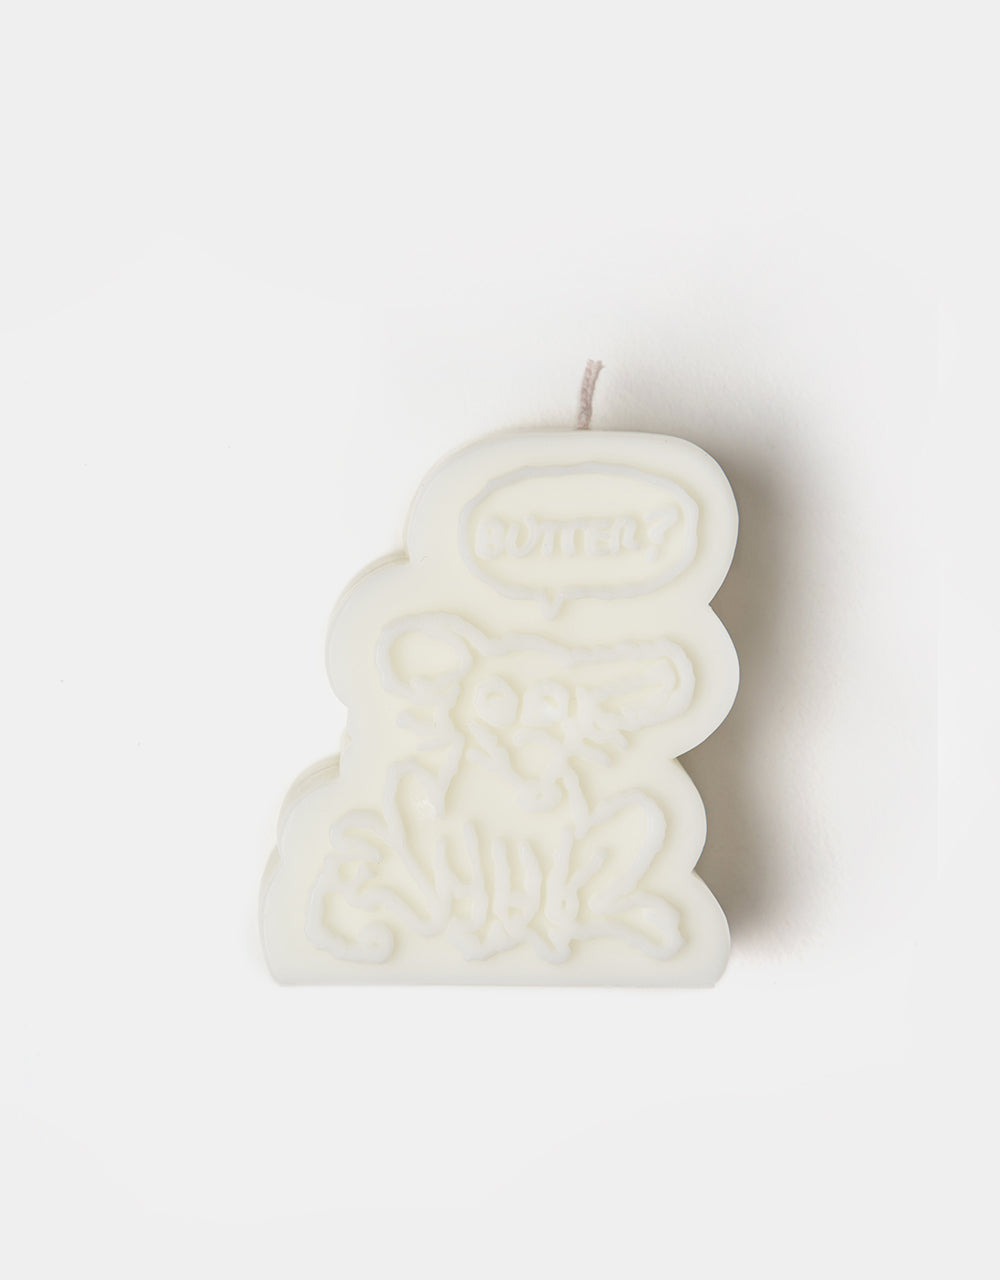 Butter Goods Rodent Candle - White